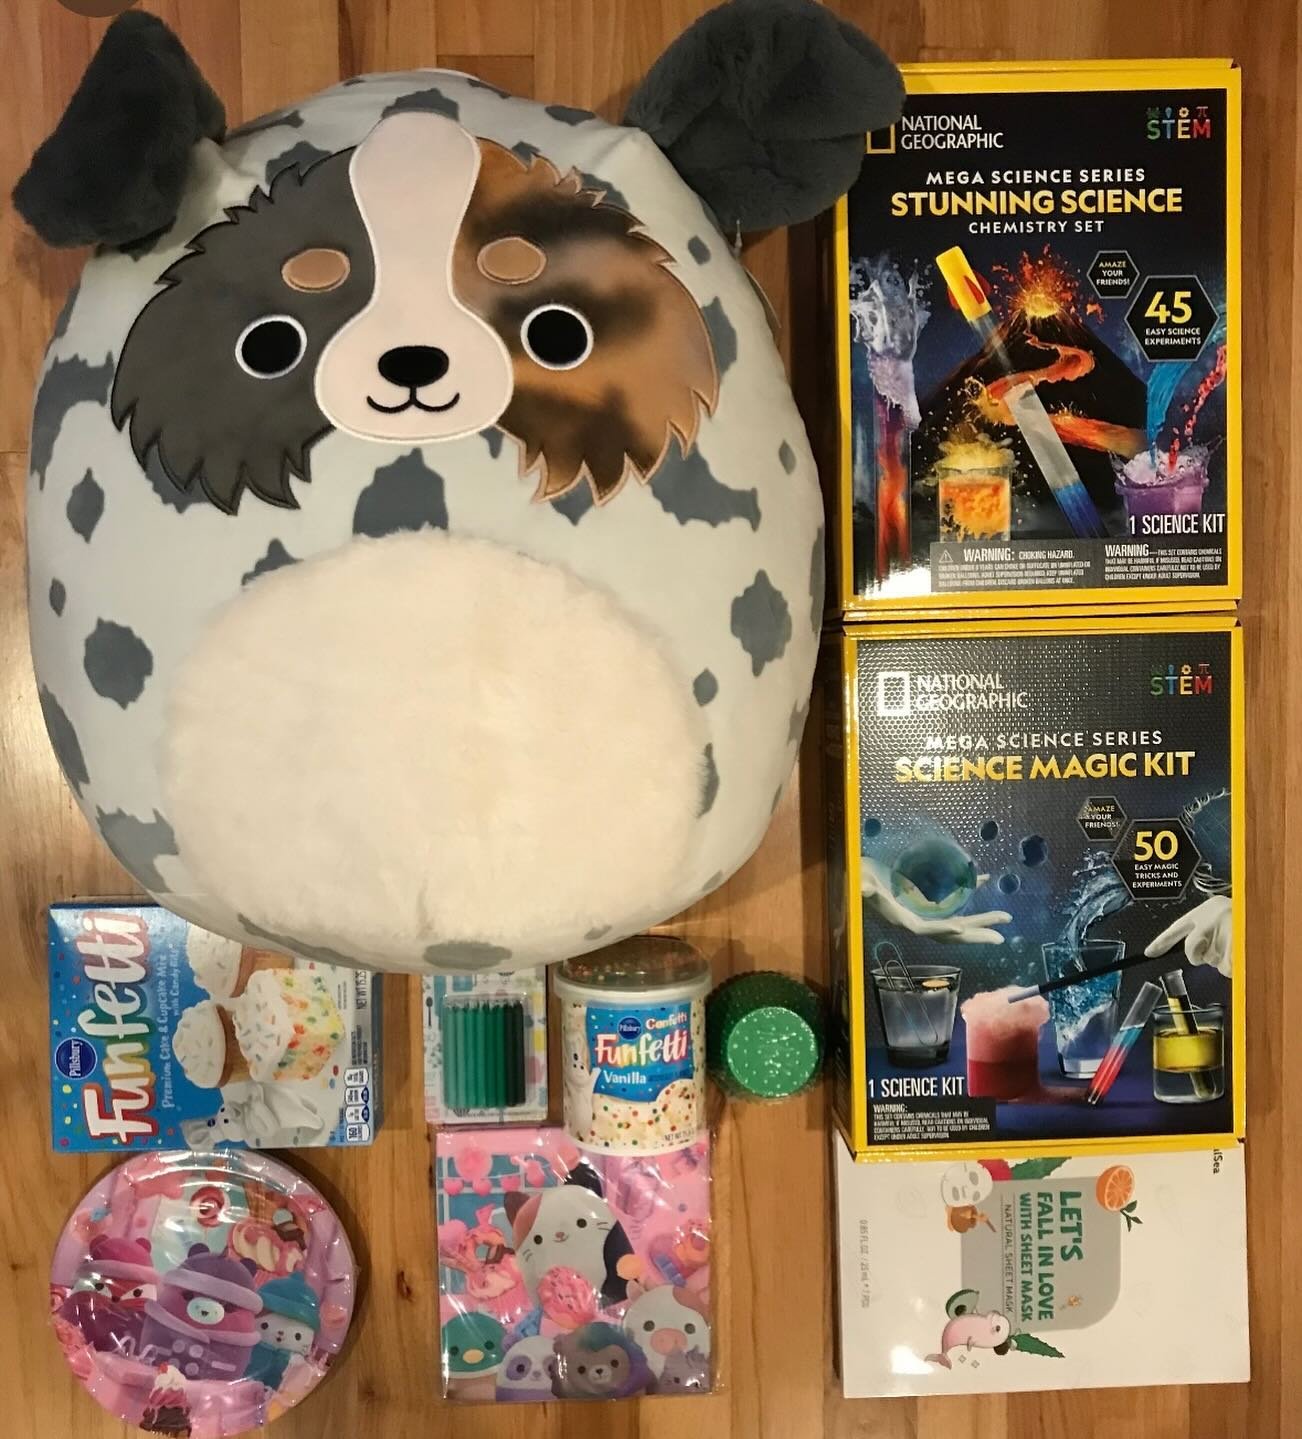 ❤️🎂🎉 FEEDBACK FRIDAY 🎉🎂❤️

&ldquo;The Birthday Kit was absolutely amazing and beyond my wildest dreams! This is sincerely one of the most thoughtful programs out there. It&rsquo;s filling parent&rsquo;s hearts and children&rsquo;s hearts full whe